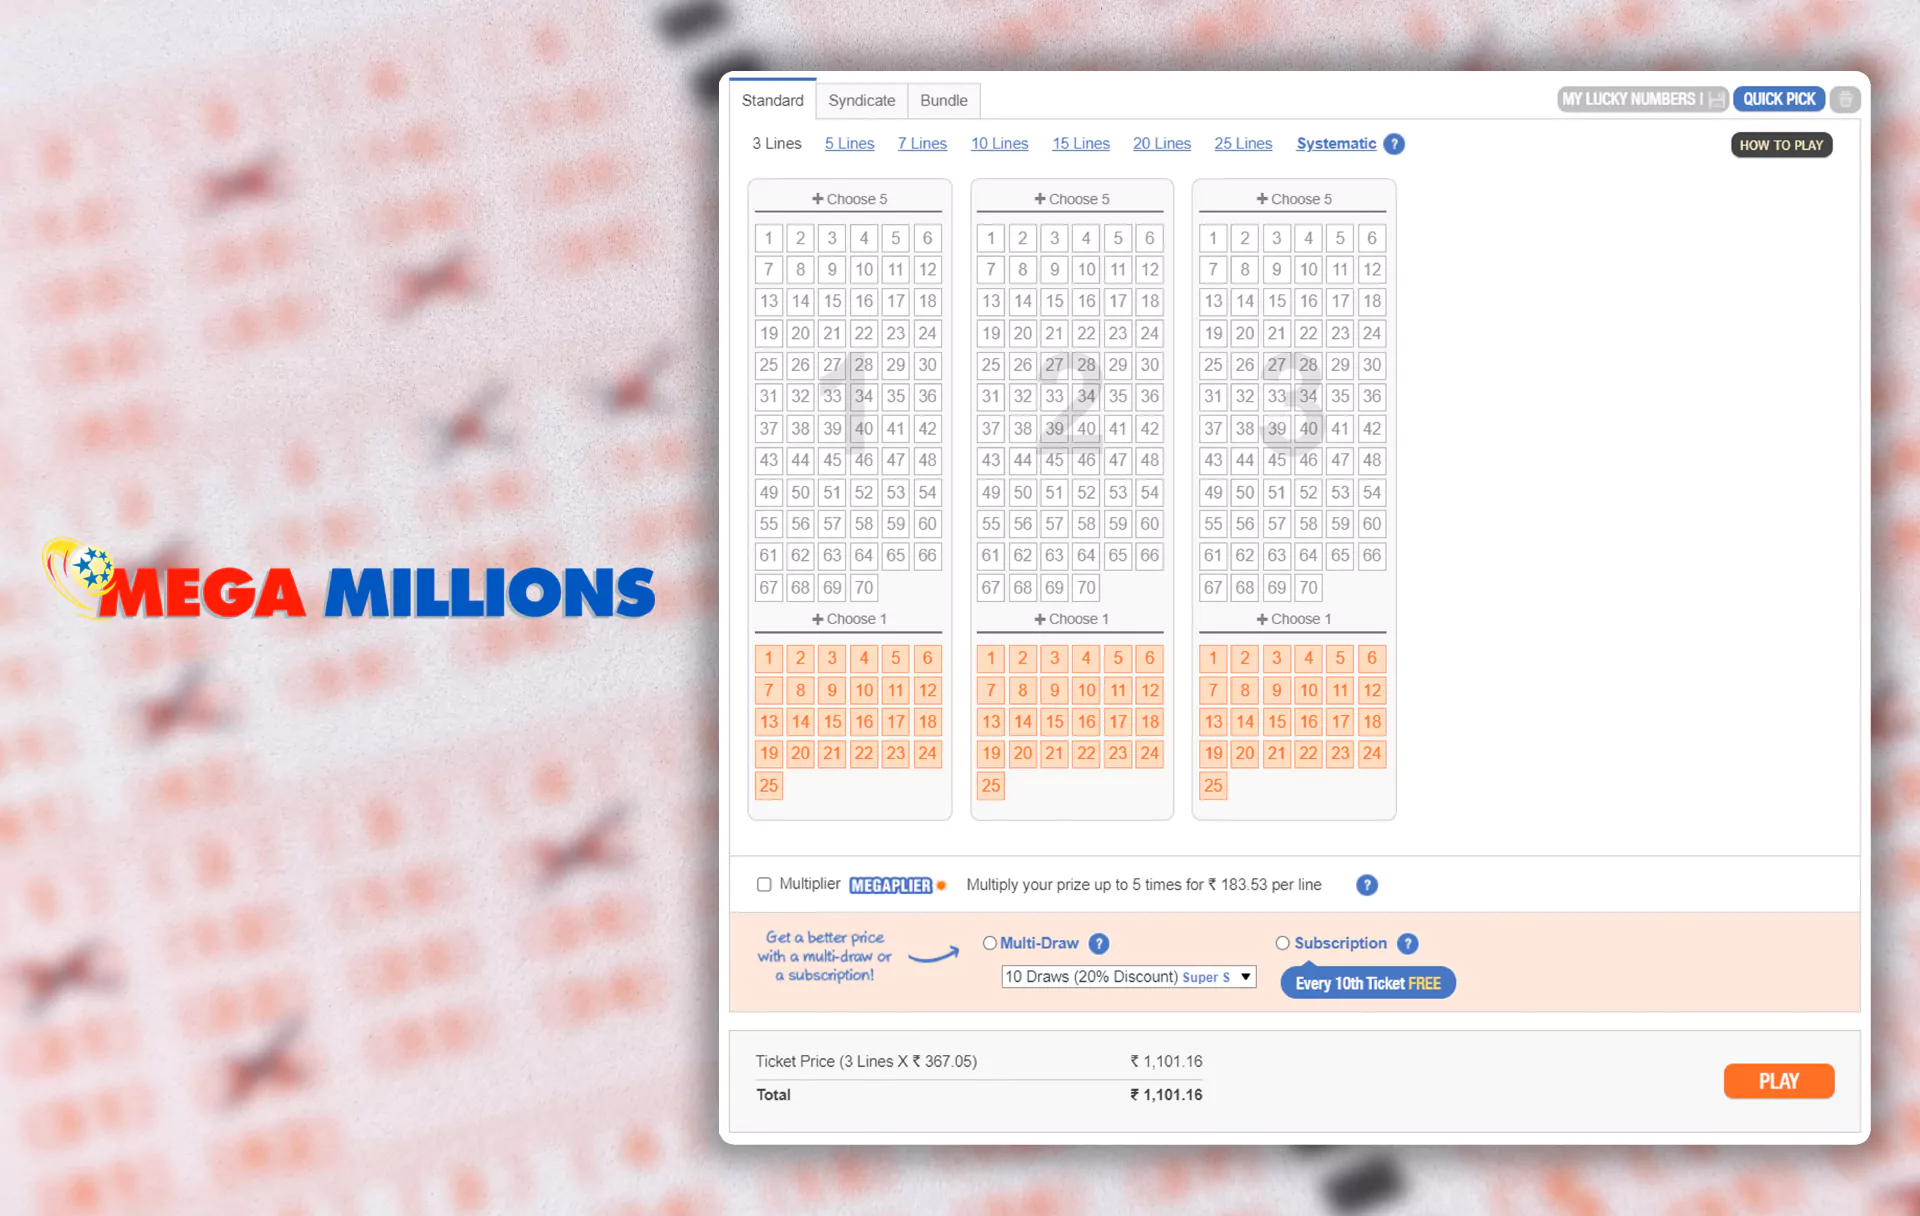 MegaMillions is an American lottery with a jackpot from 12 million dollars.